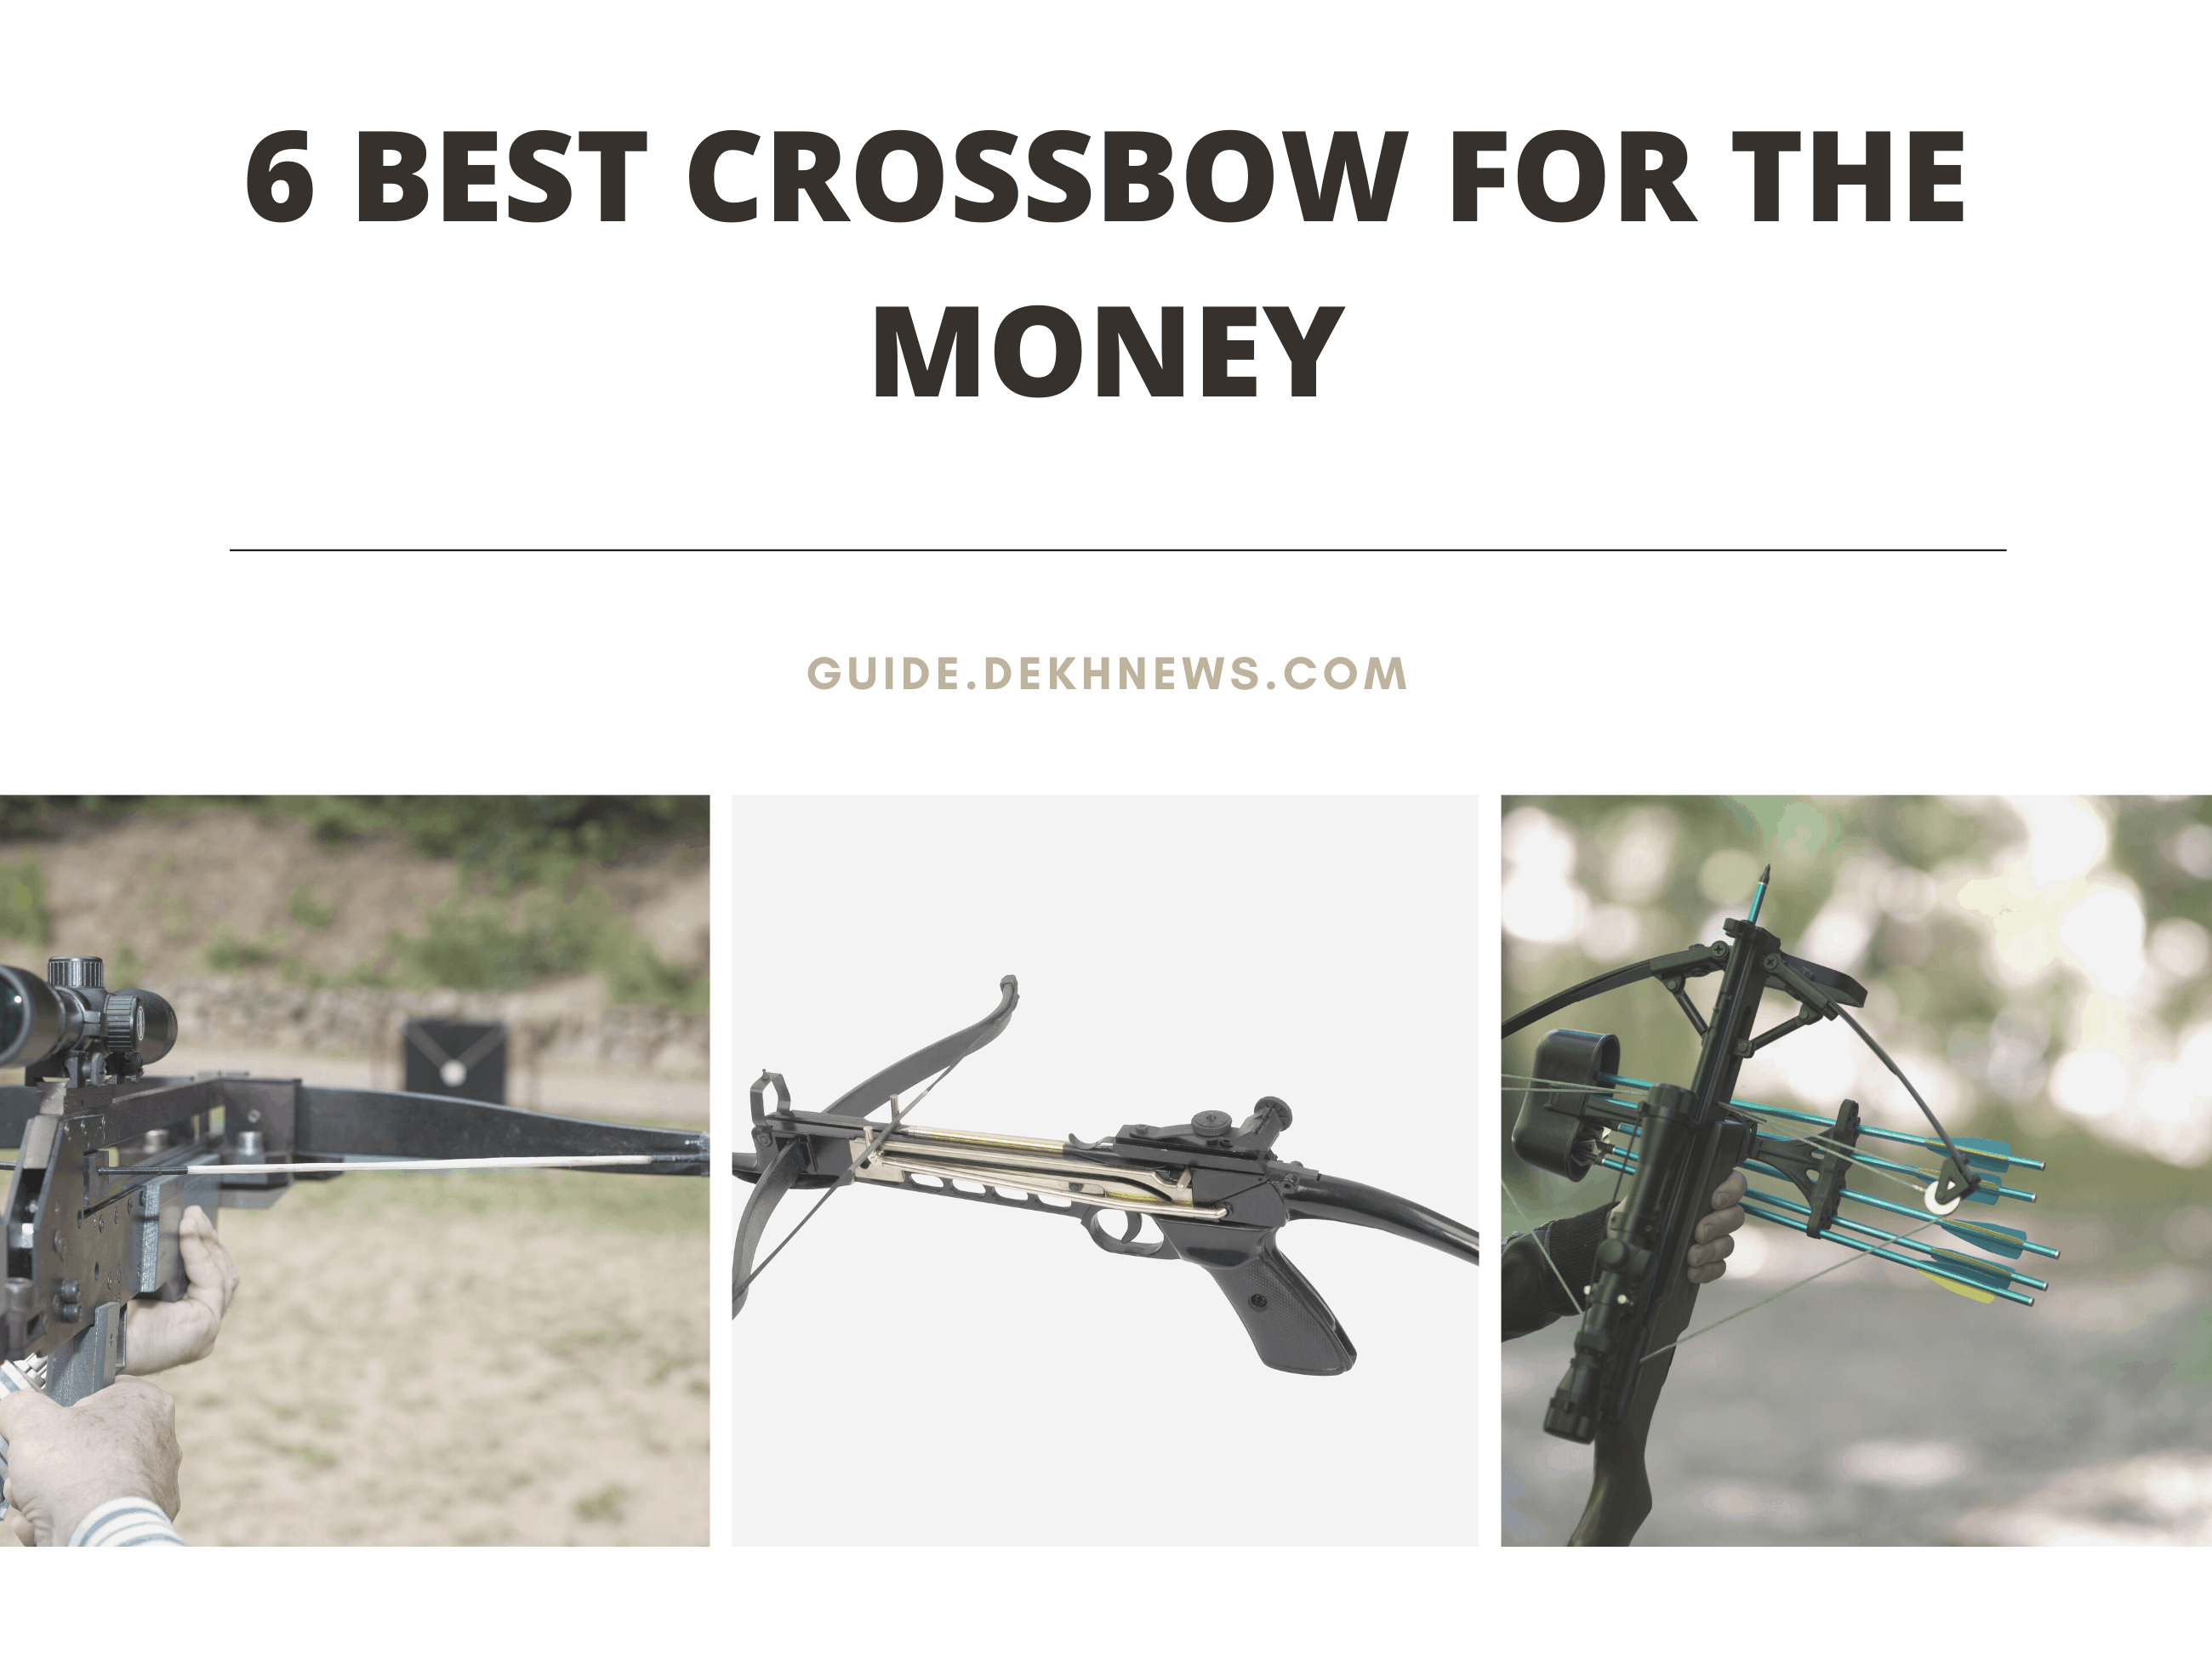 6 Best Crossbow For the Money